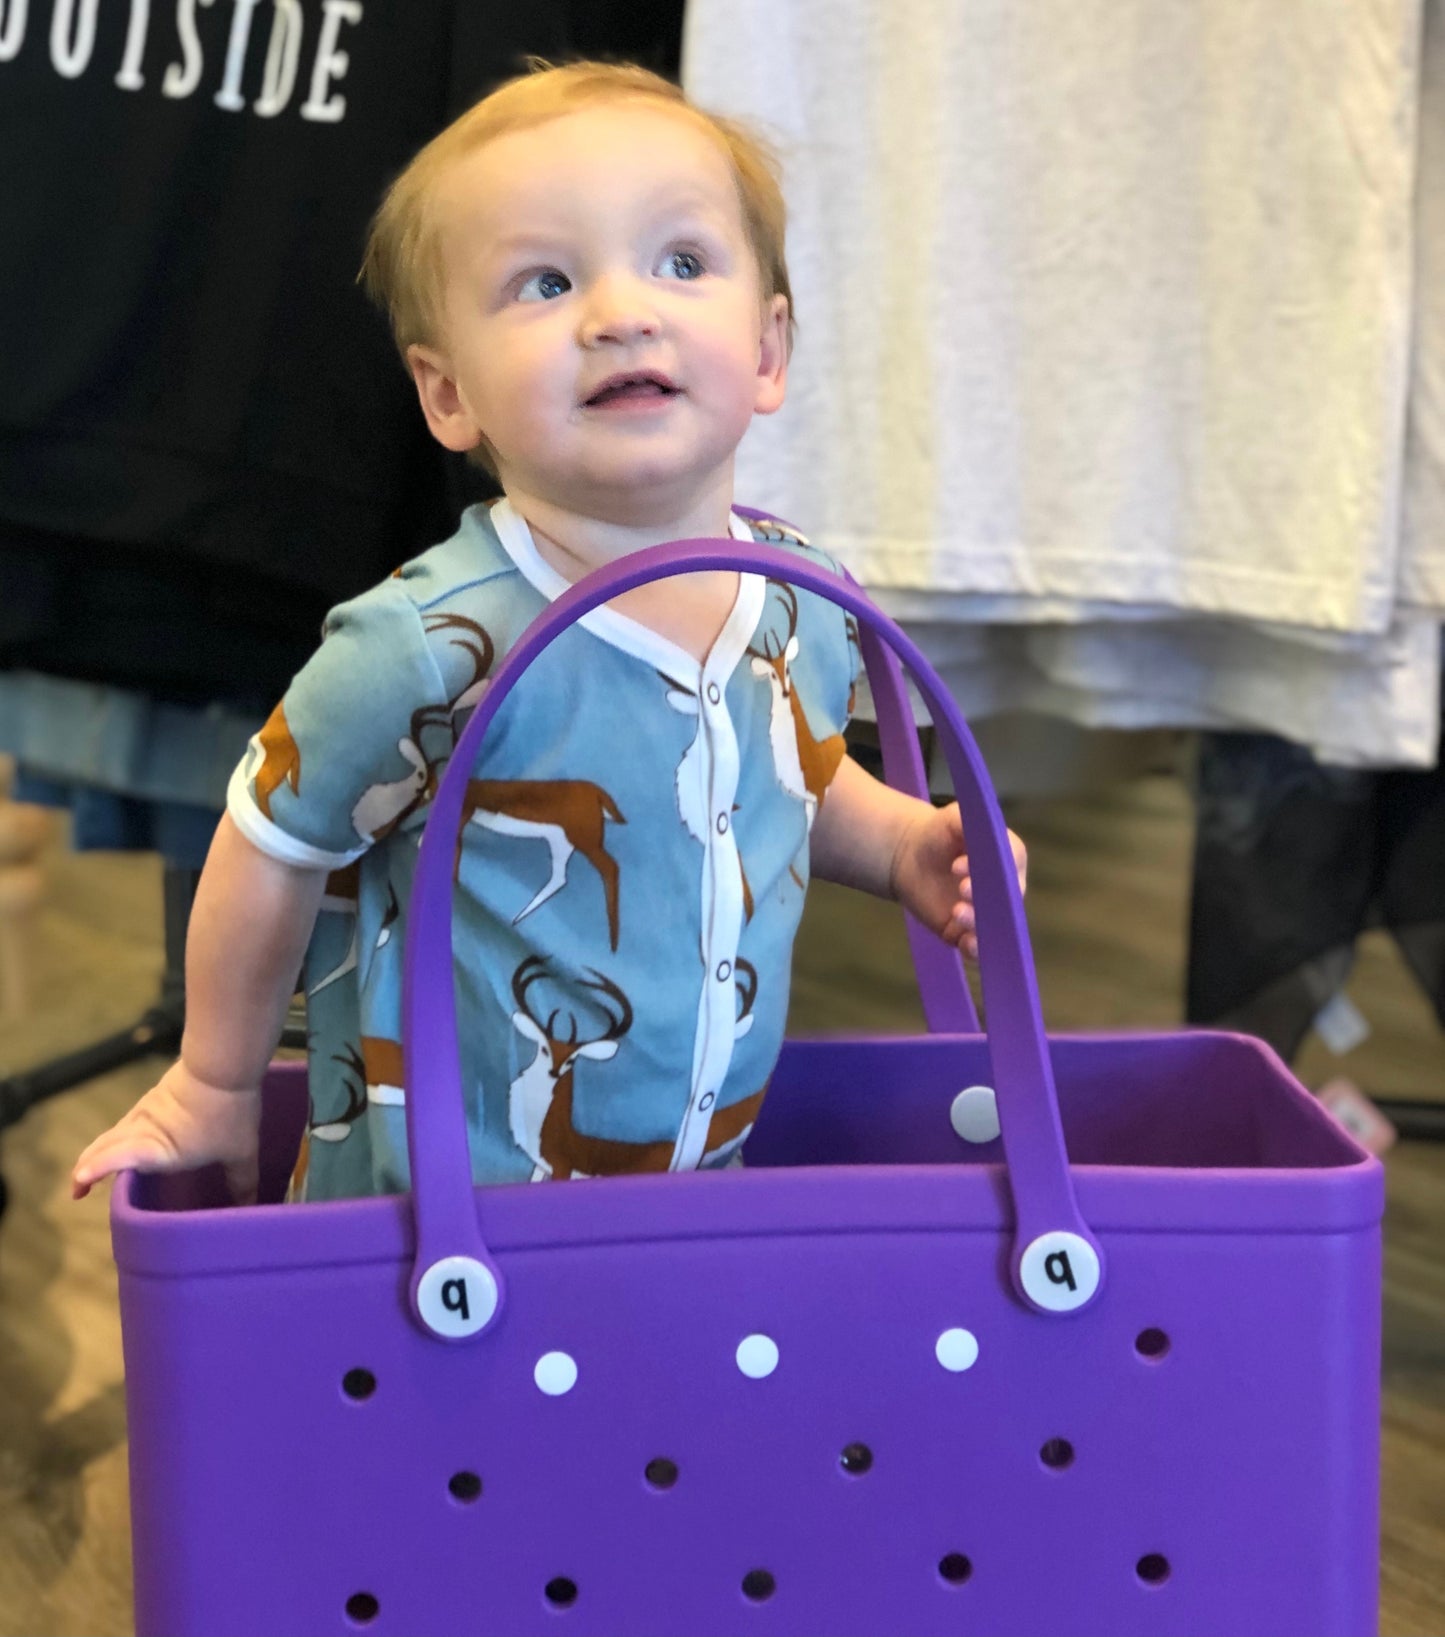 The Original Bogg Bag - i LILAC you a lot – Brother and Sissy Children's  Boutique